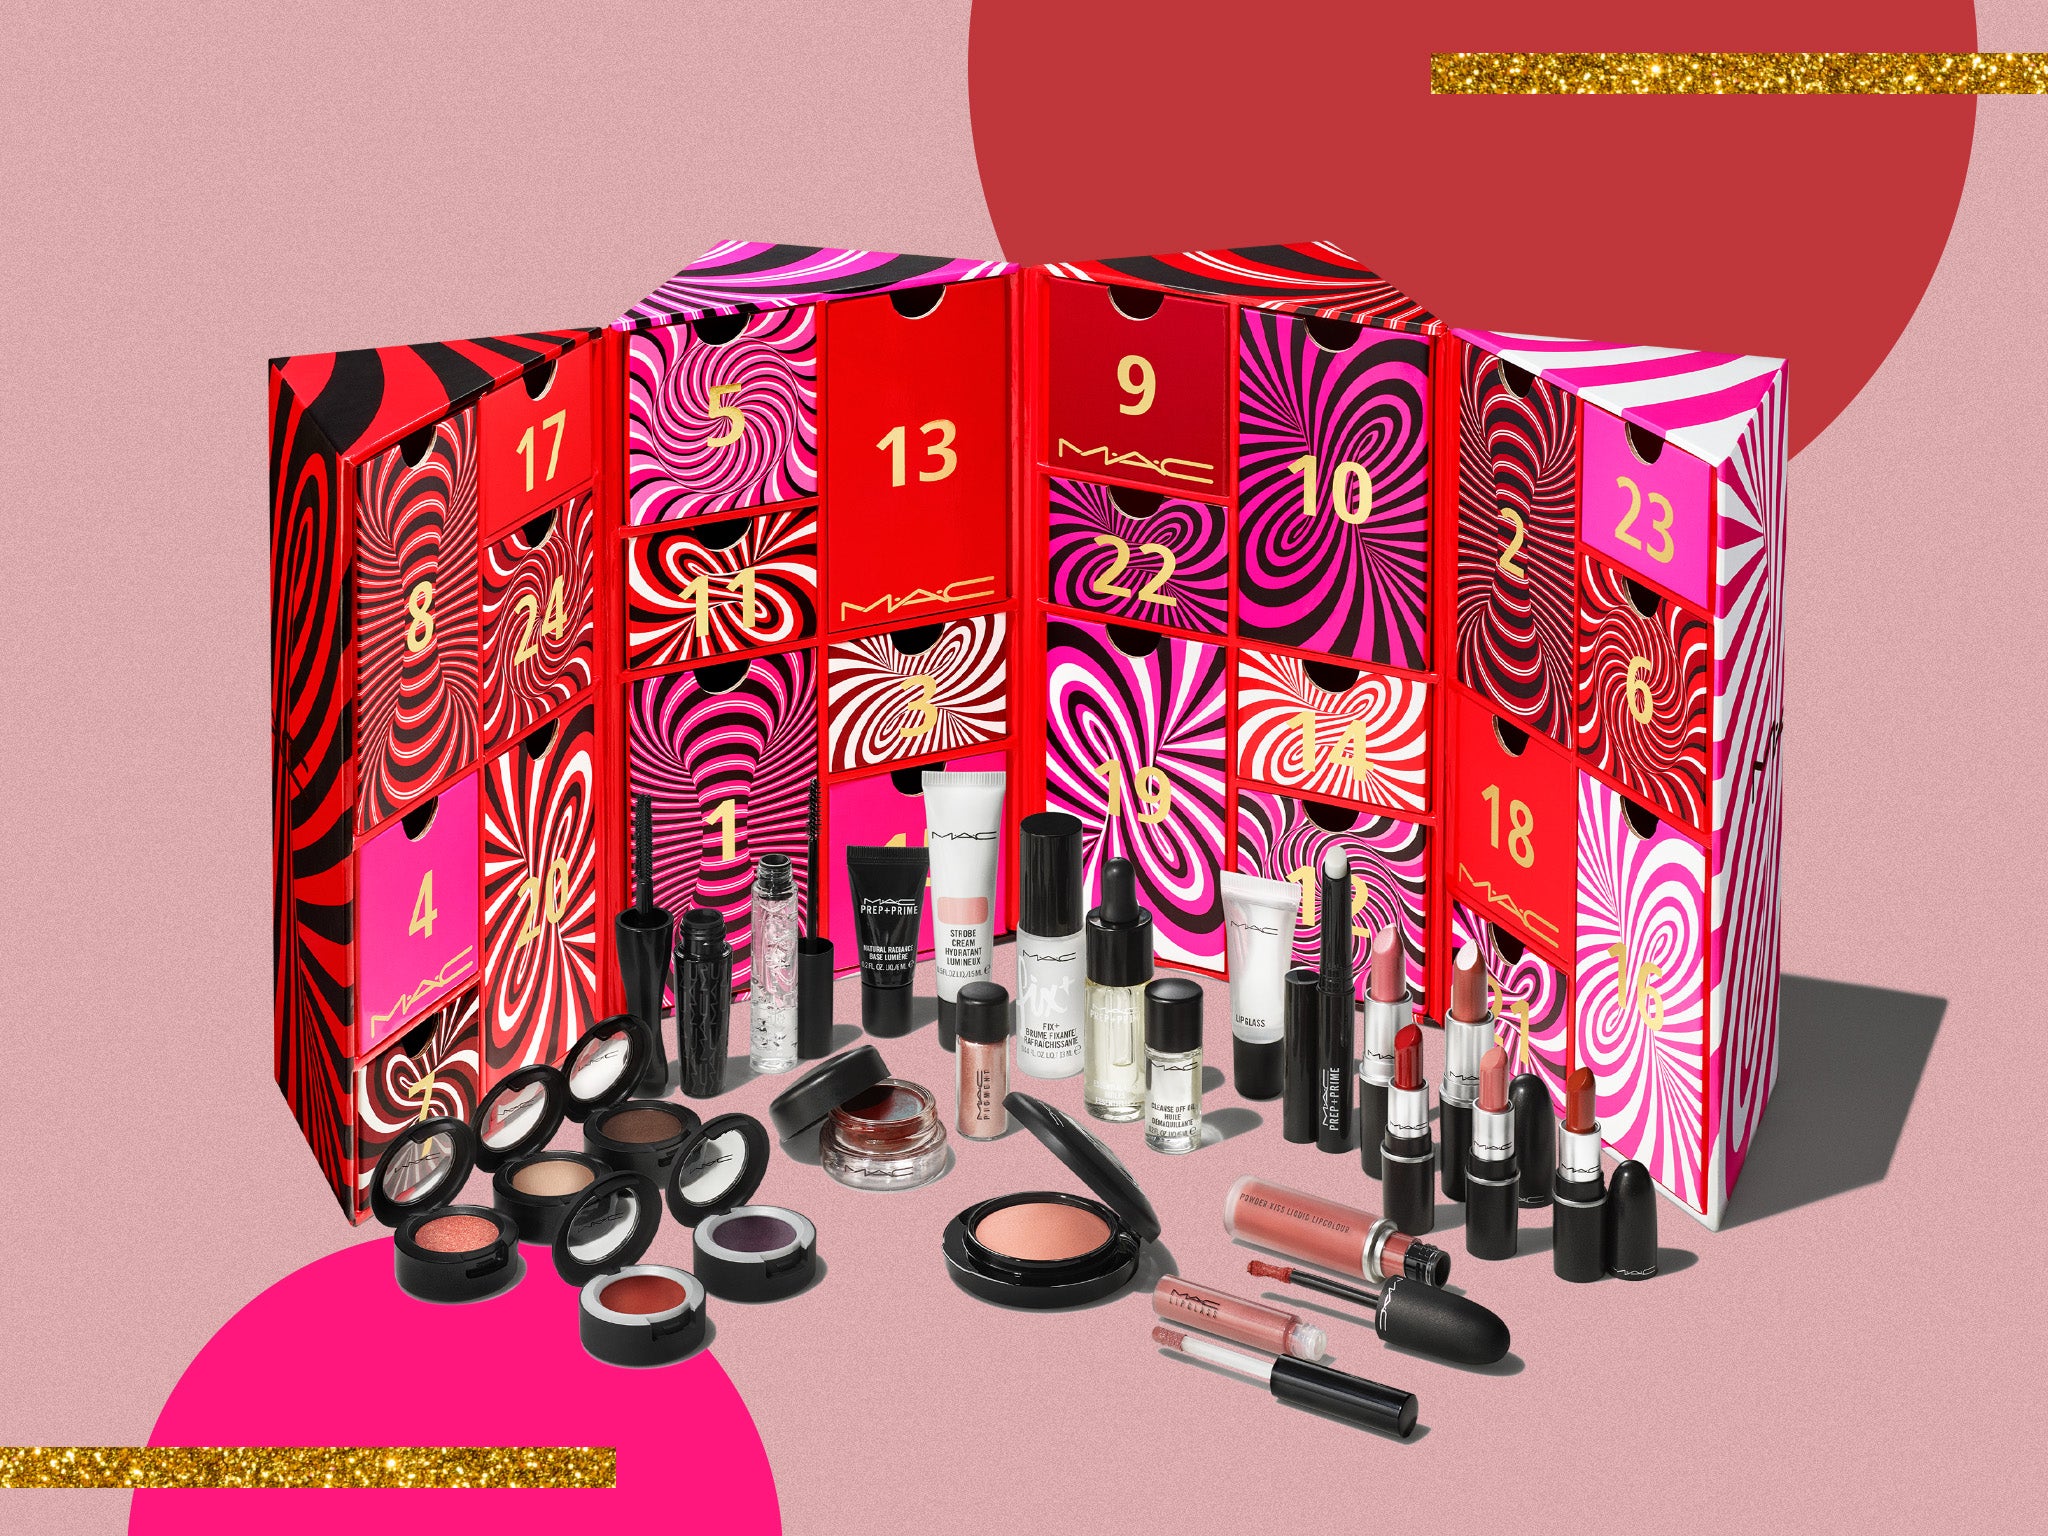 Mac beauty advent calendar review: A worthy collection of cult classics